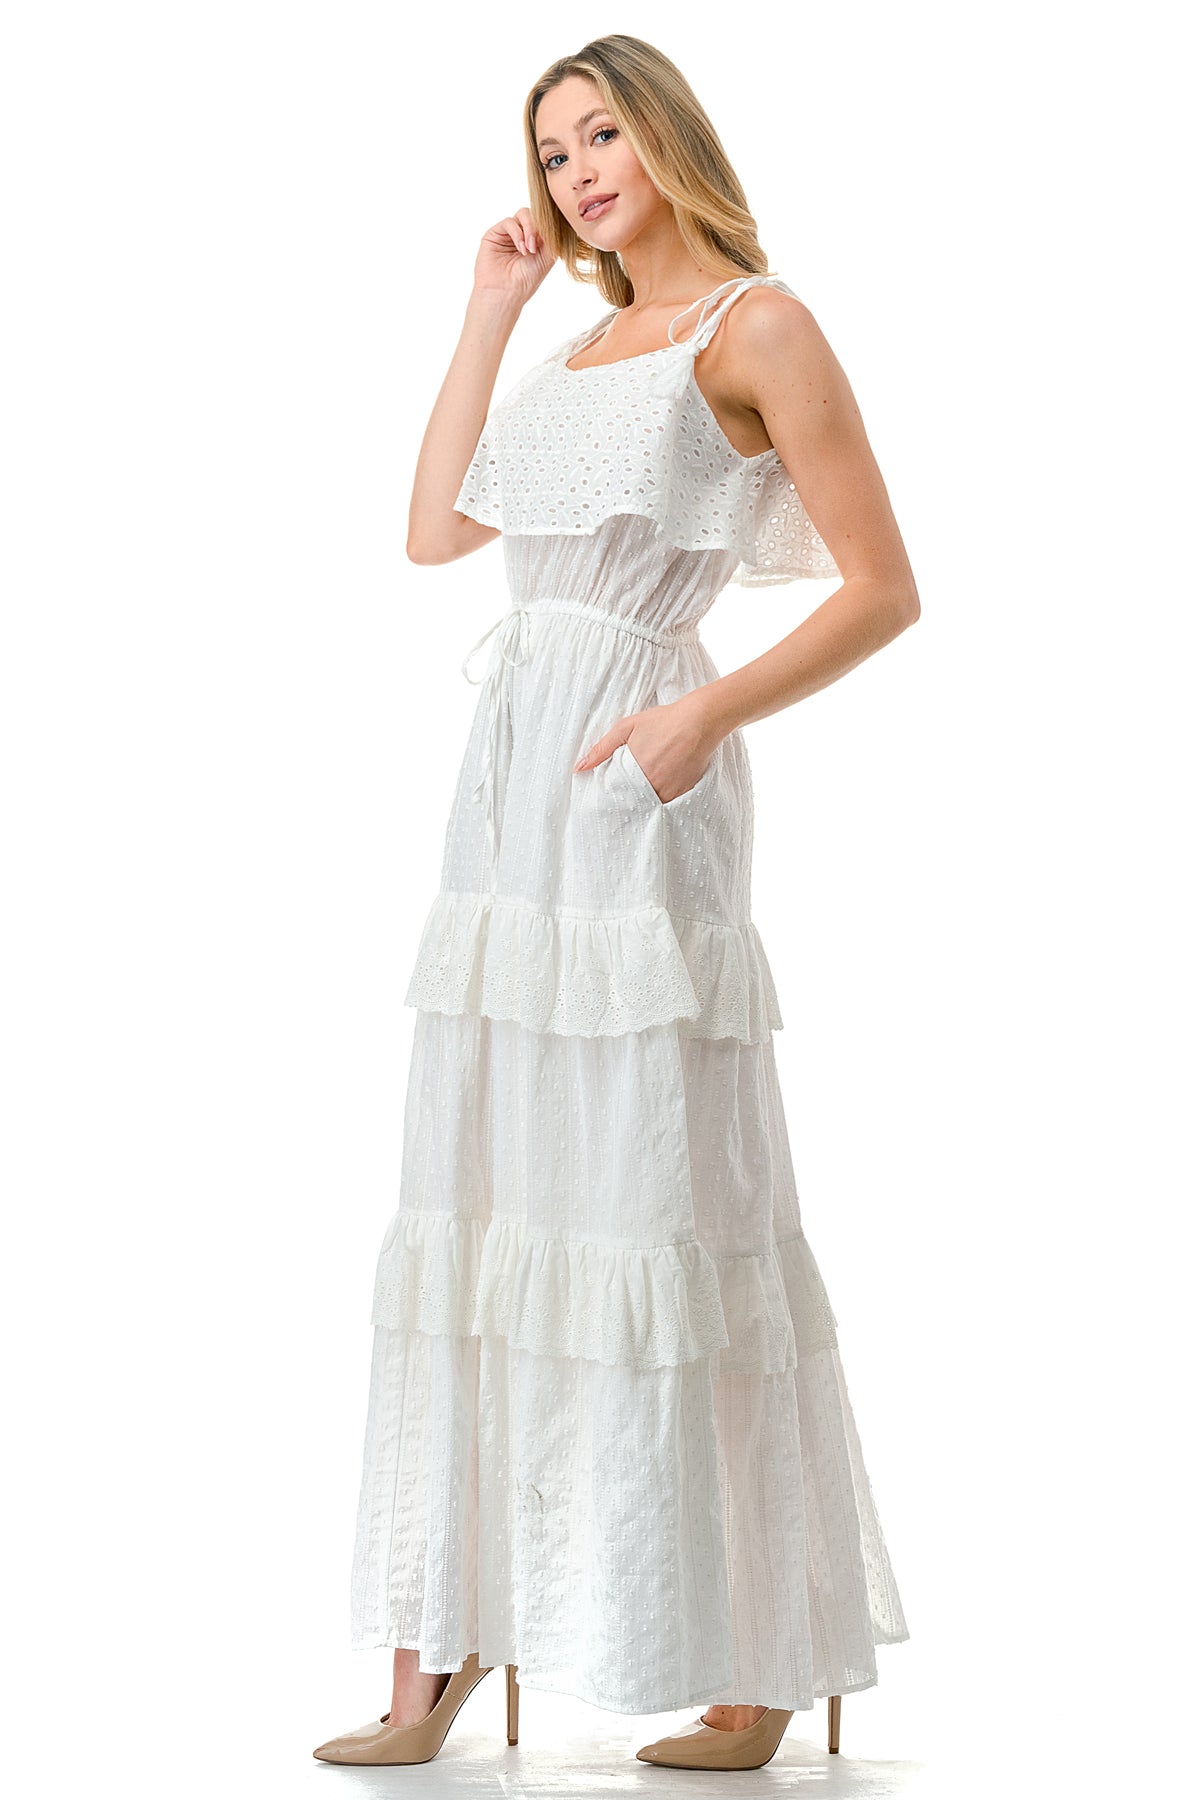 Ivory Textured Fabric Eyelet Trim Tiered Maxi Dress